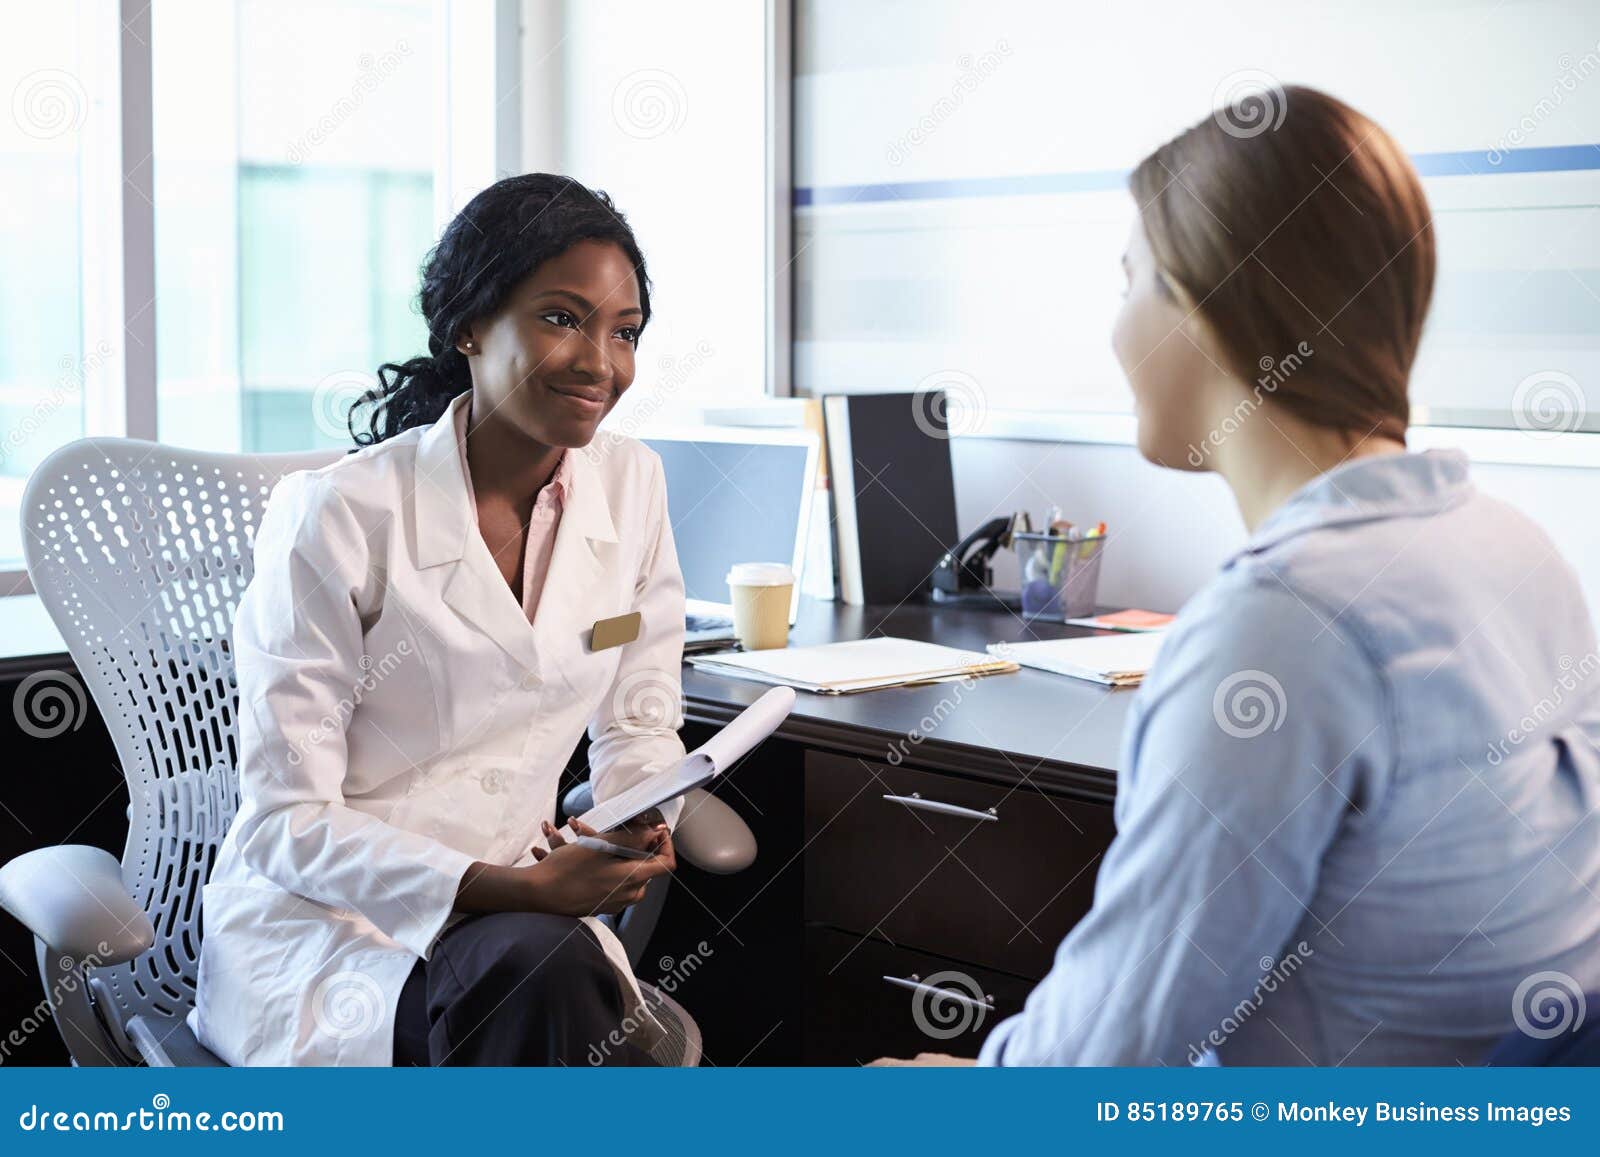 doctor in consultation with female patient in office